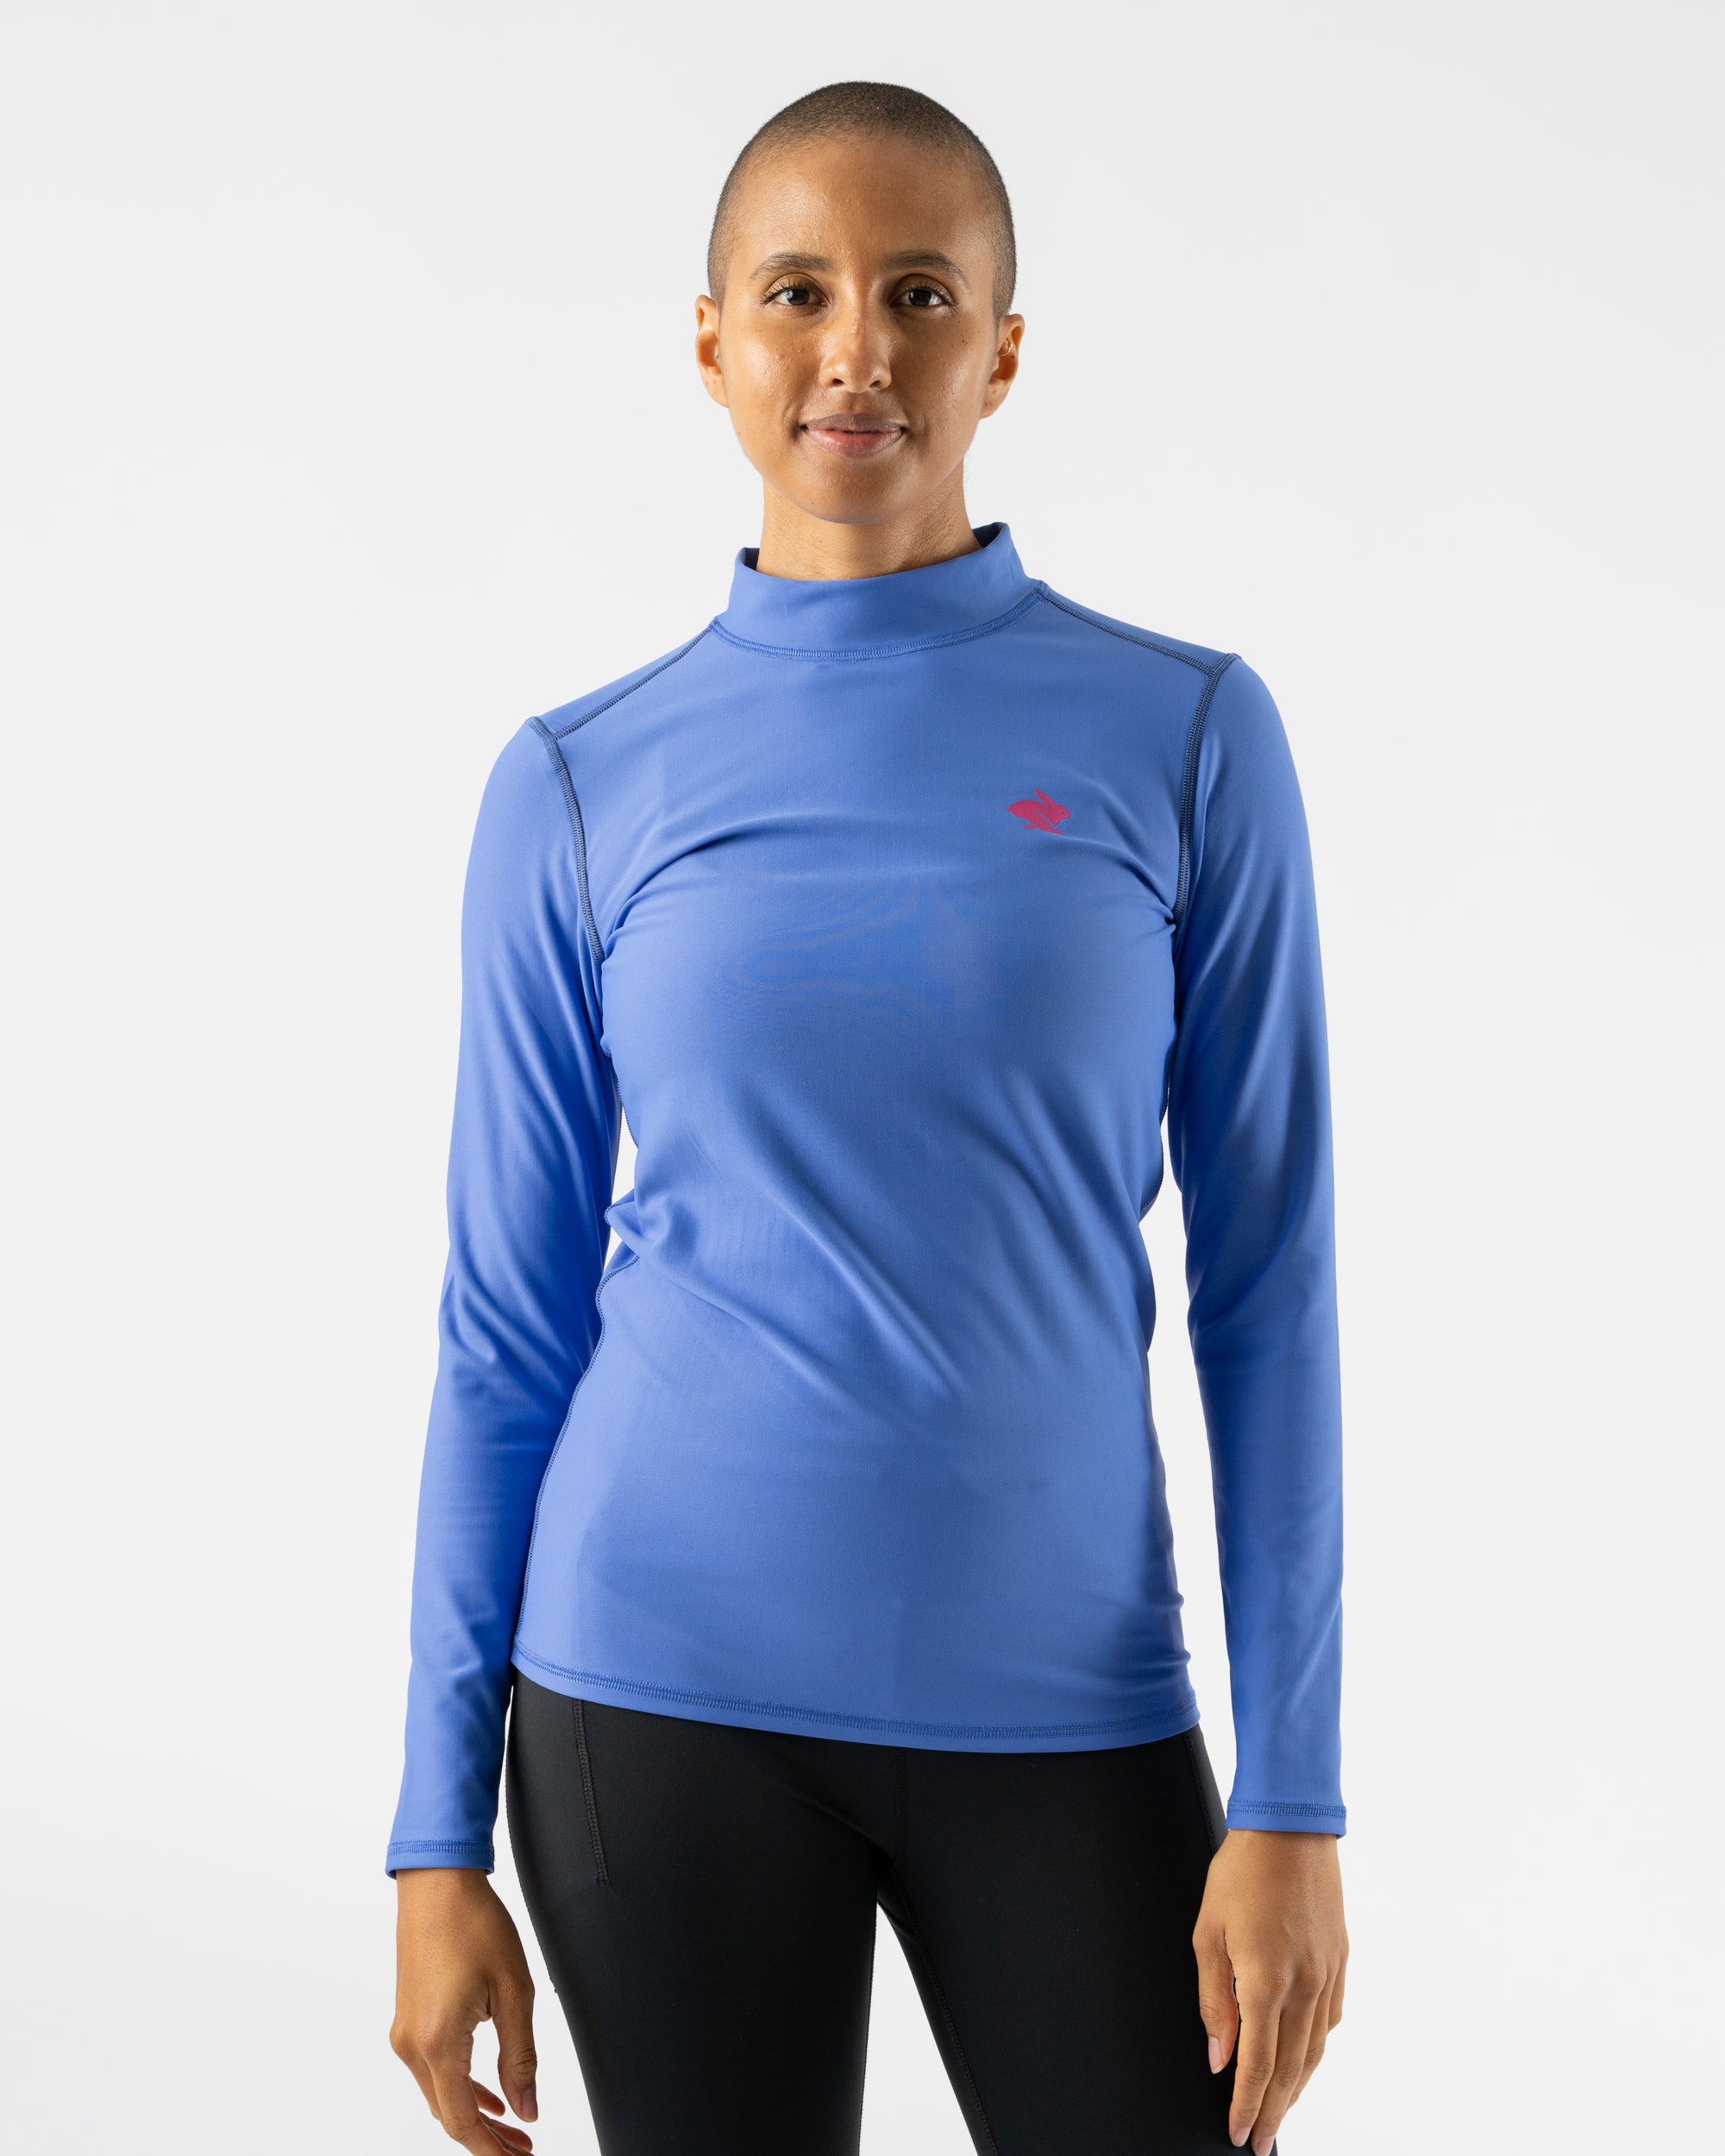 Cold Weather Running Gear - Defroster - rabbit